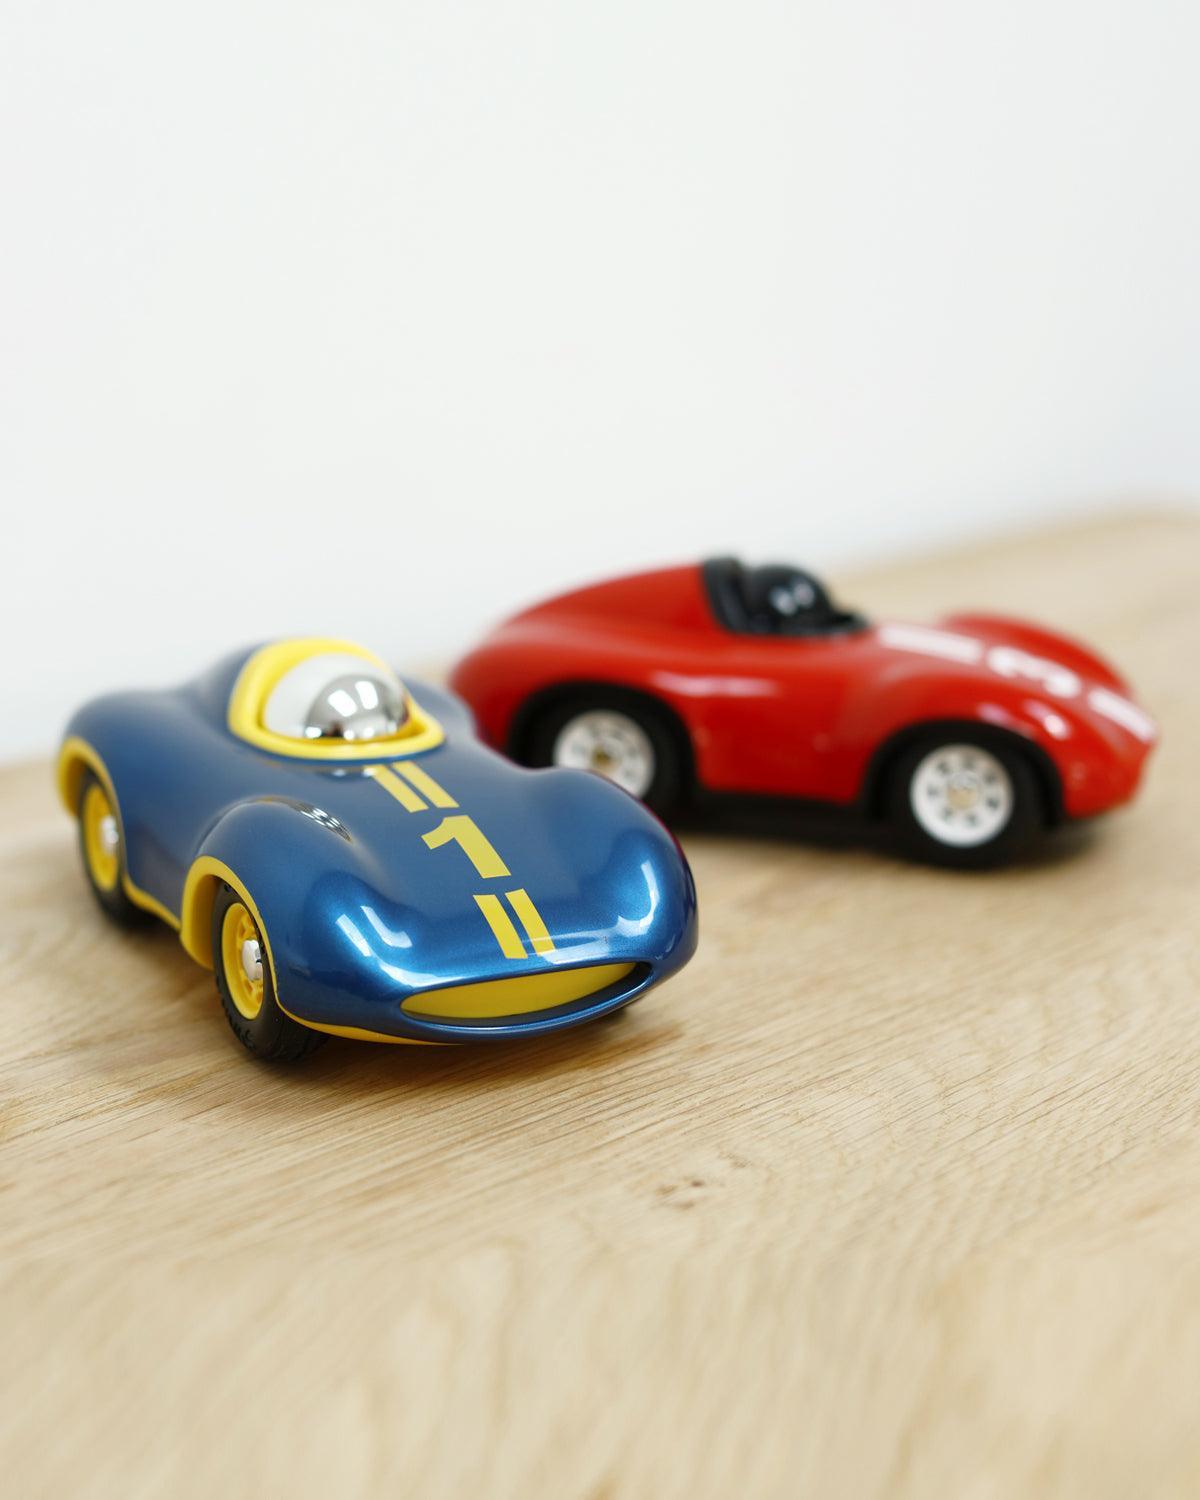 Car Min Speedy Le Mans Blue Yellow - Why and Whale